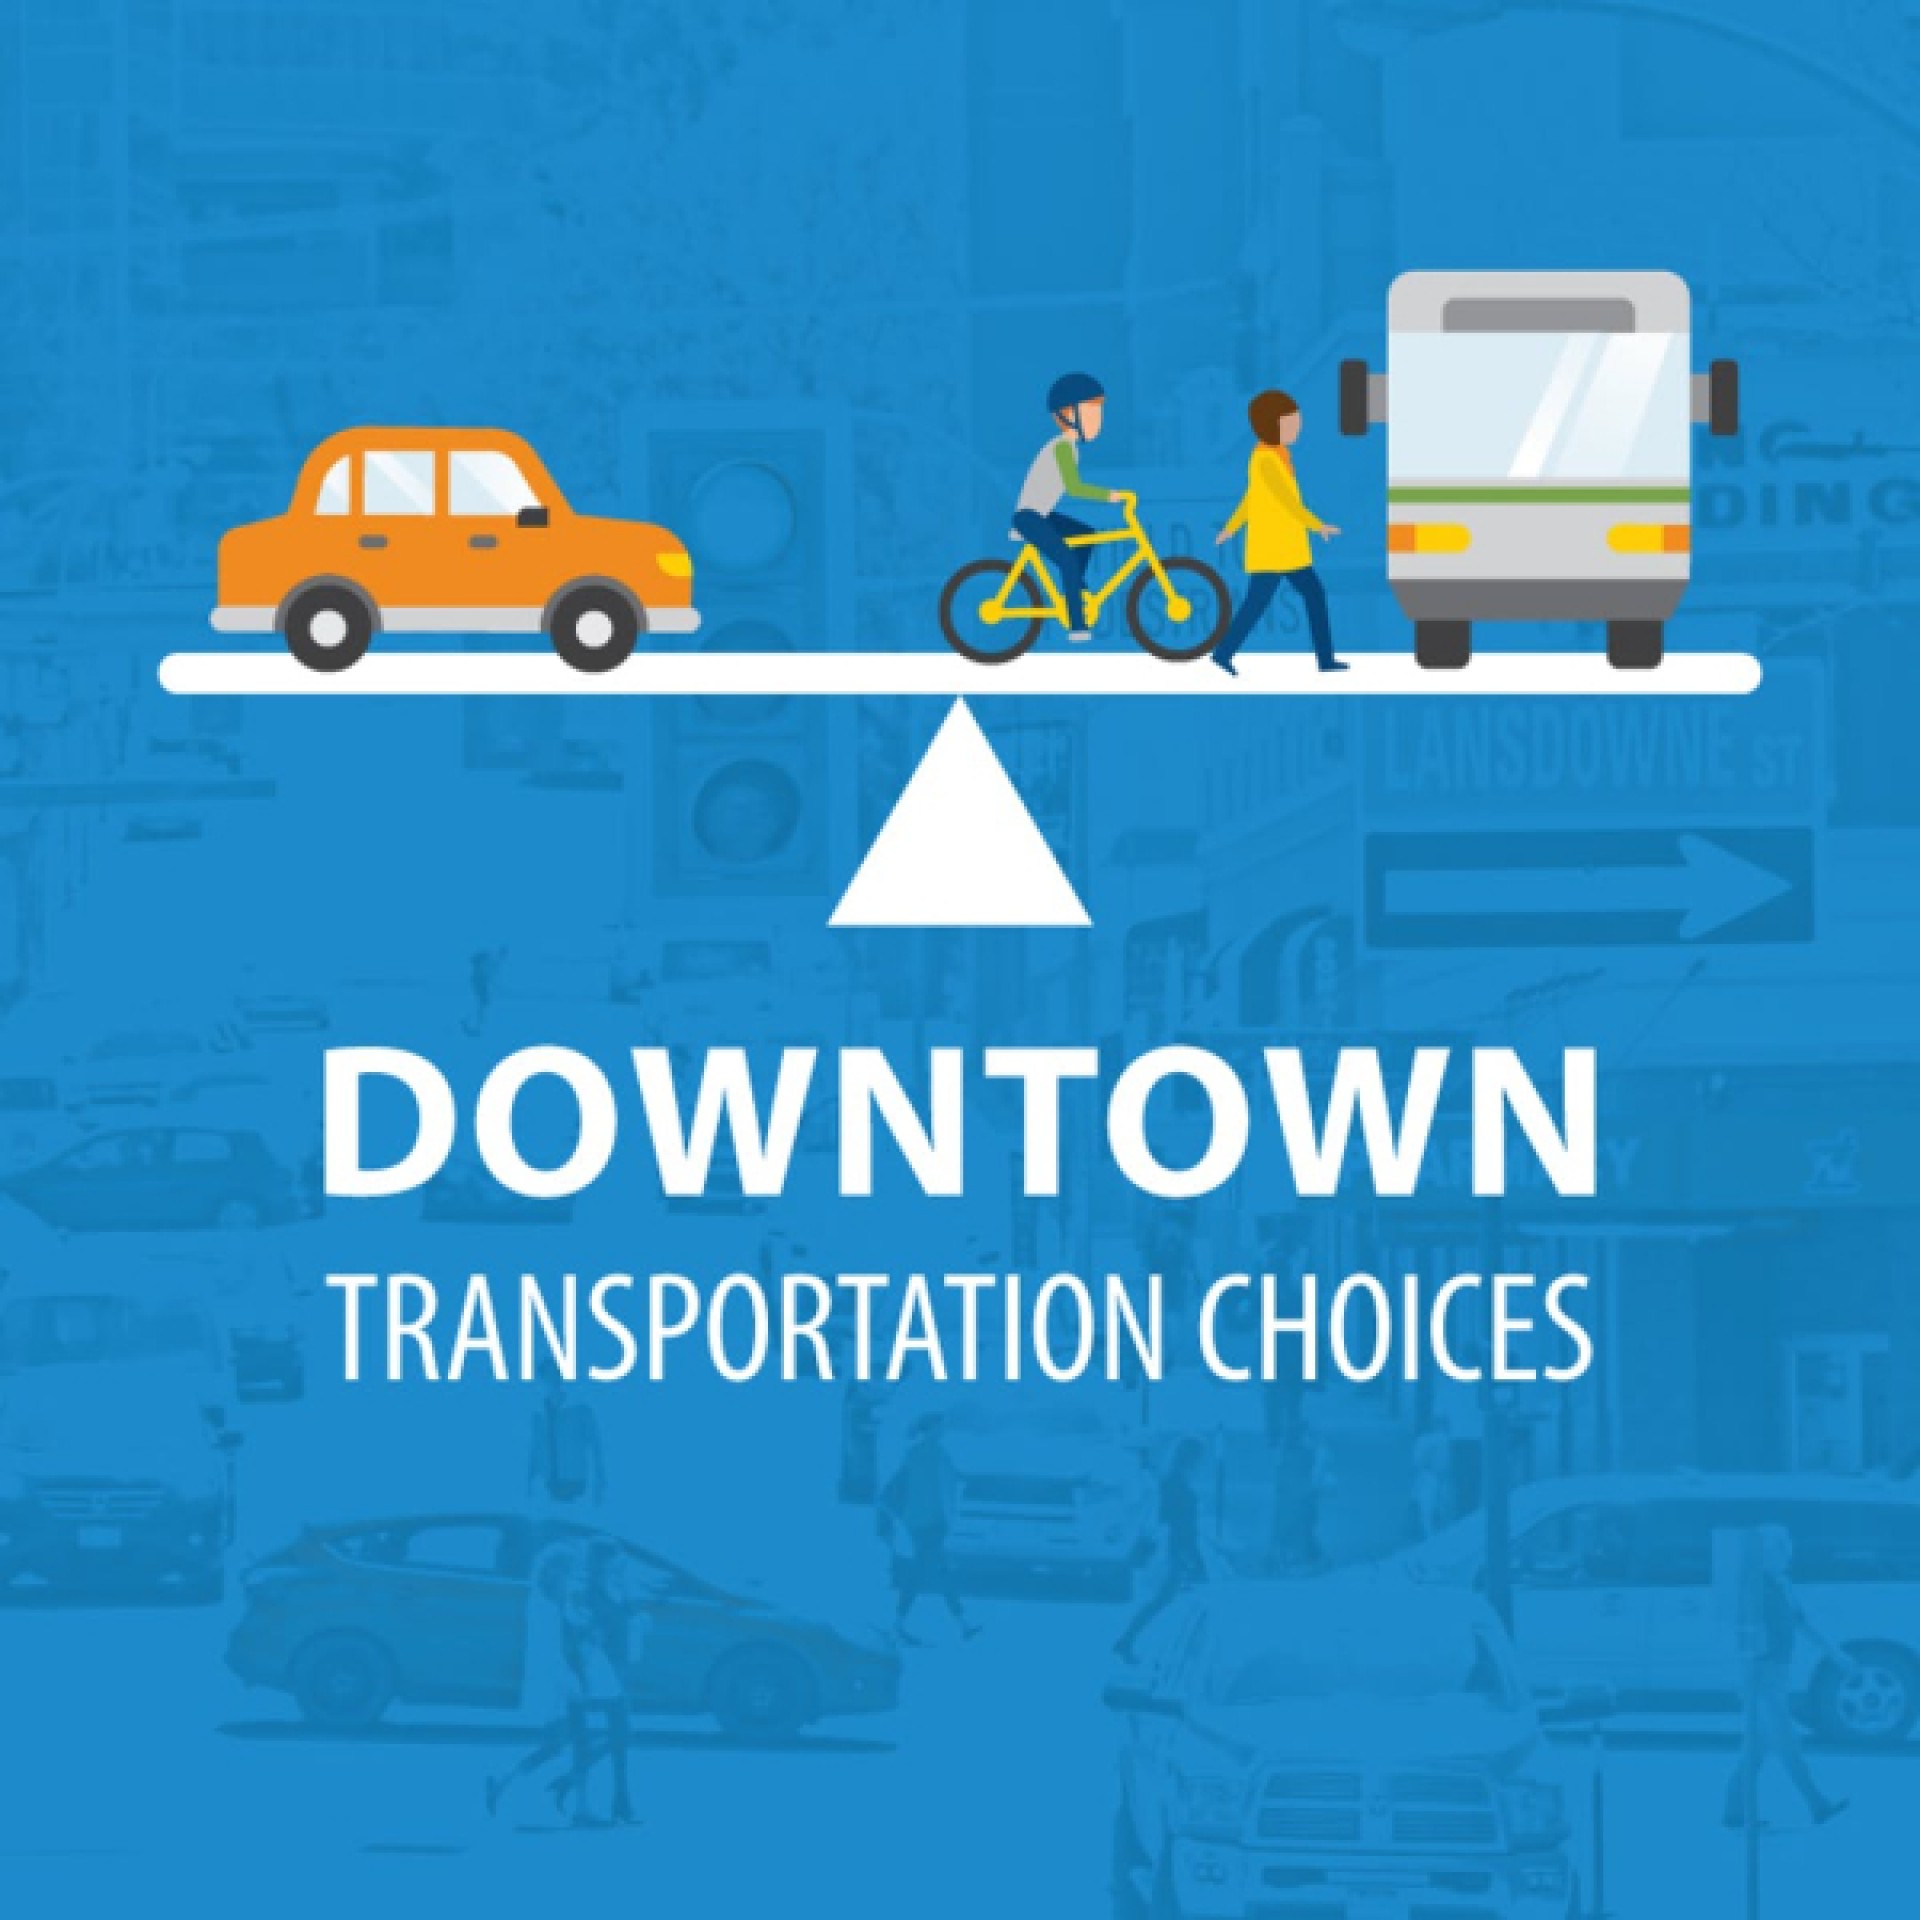 Downtown transportation choices plan vote seemingly goes sideways, perhaps actually provides important learning....